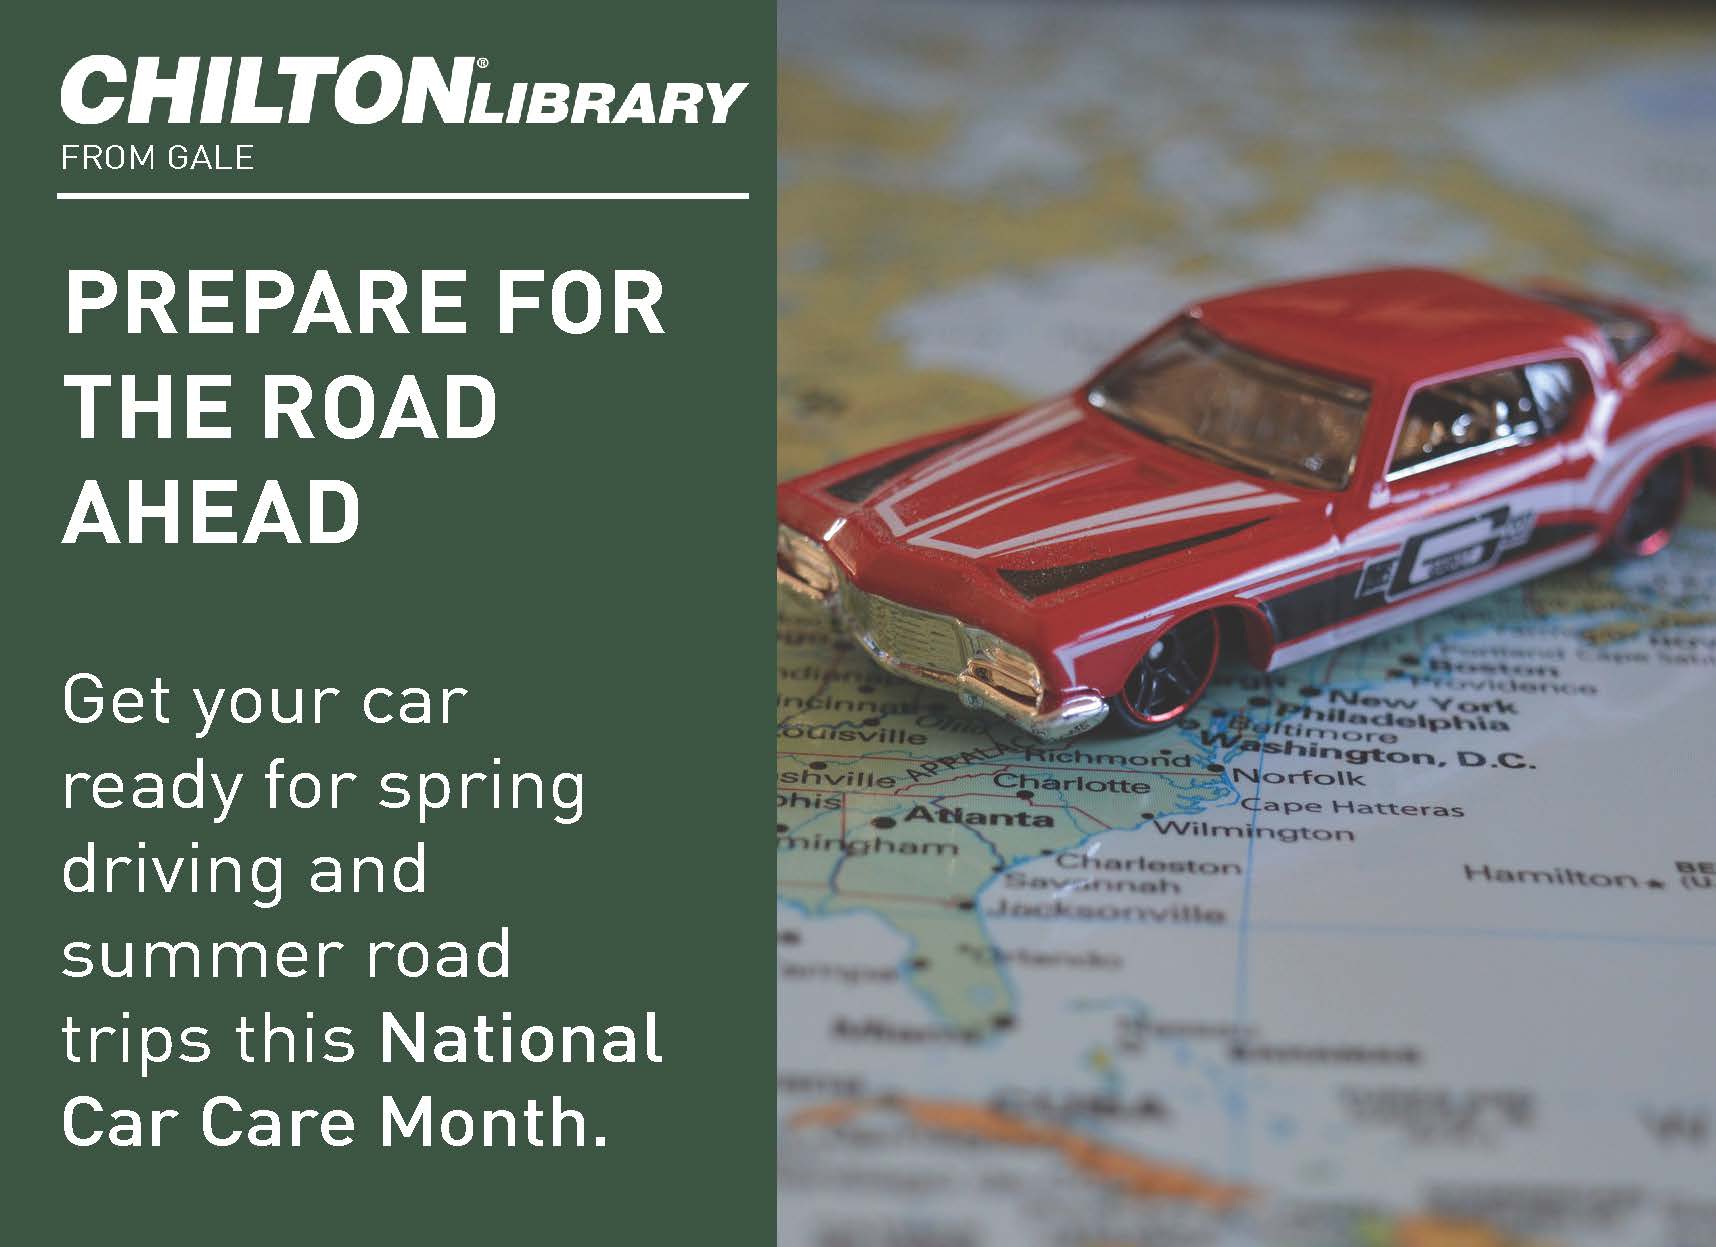 An image promoting Chilton Library for general social media during National Car Care Month